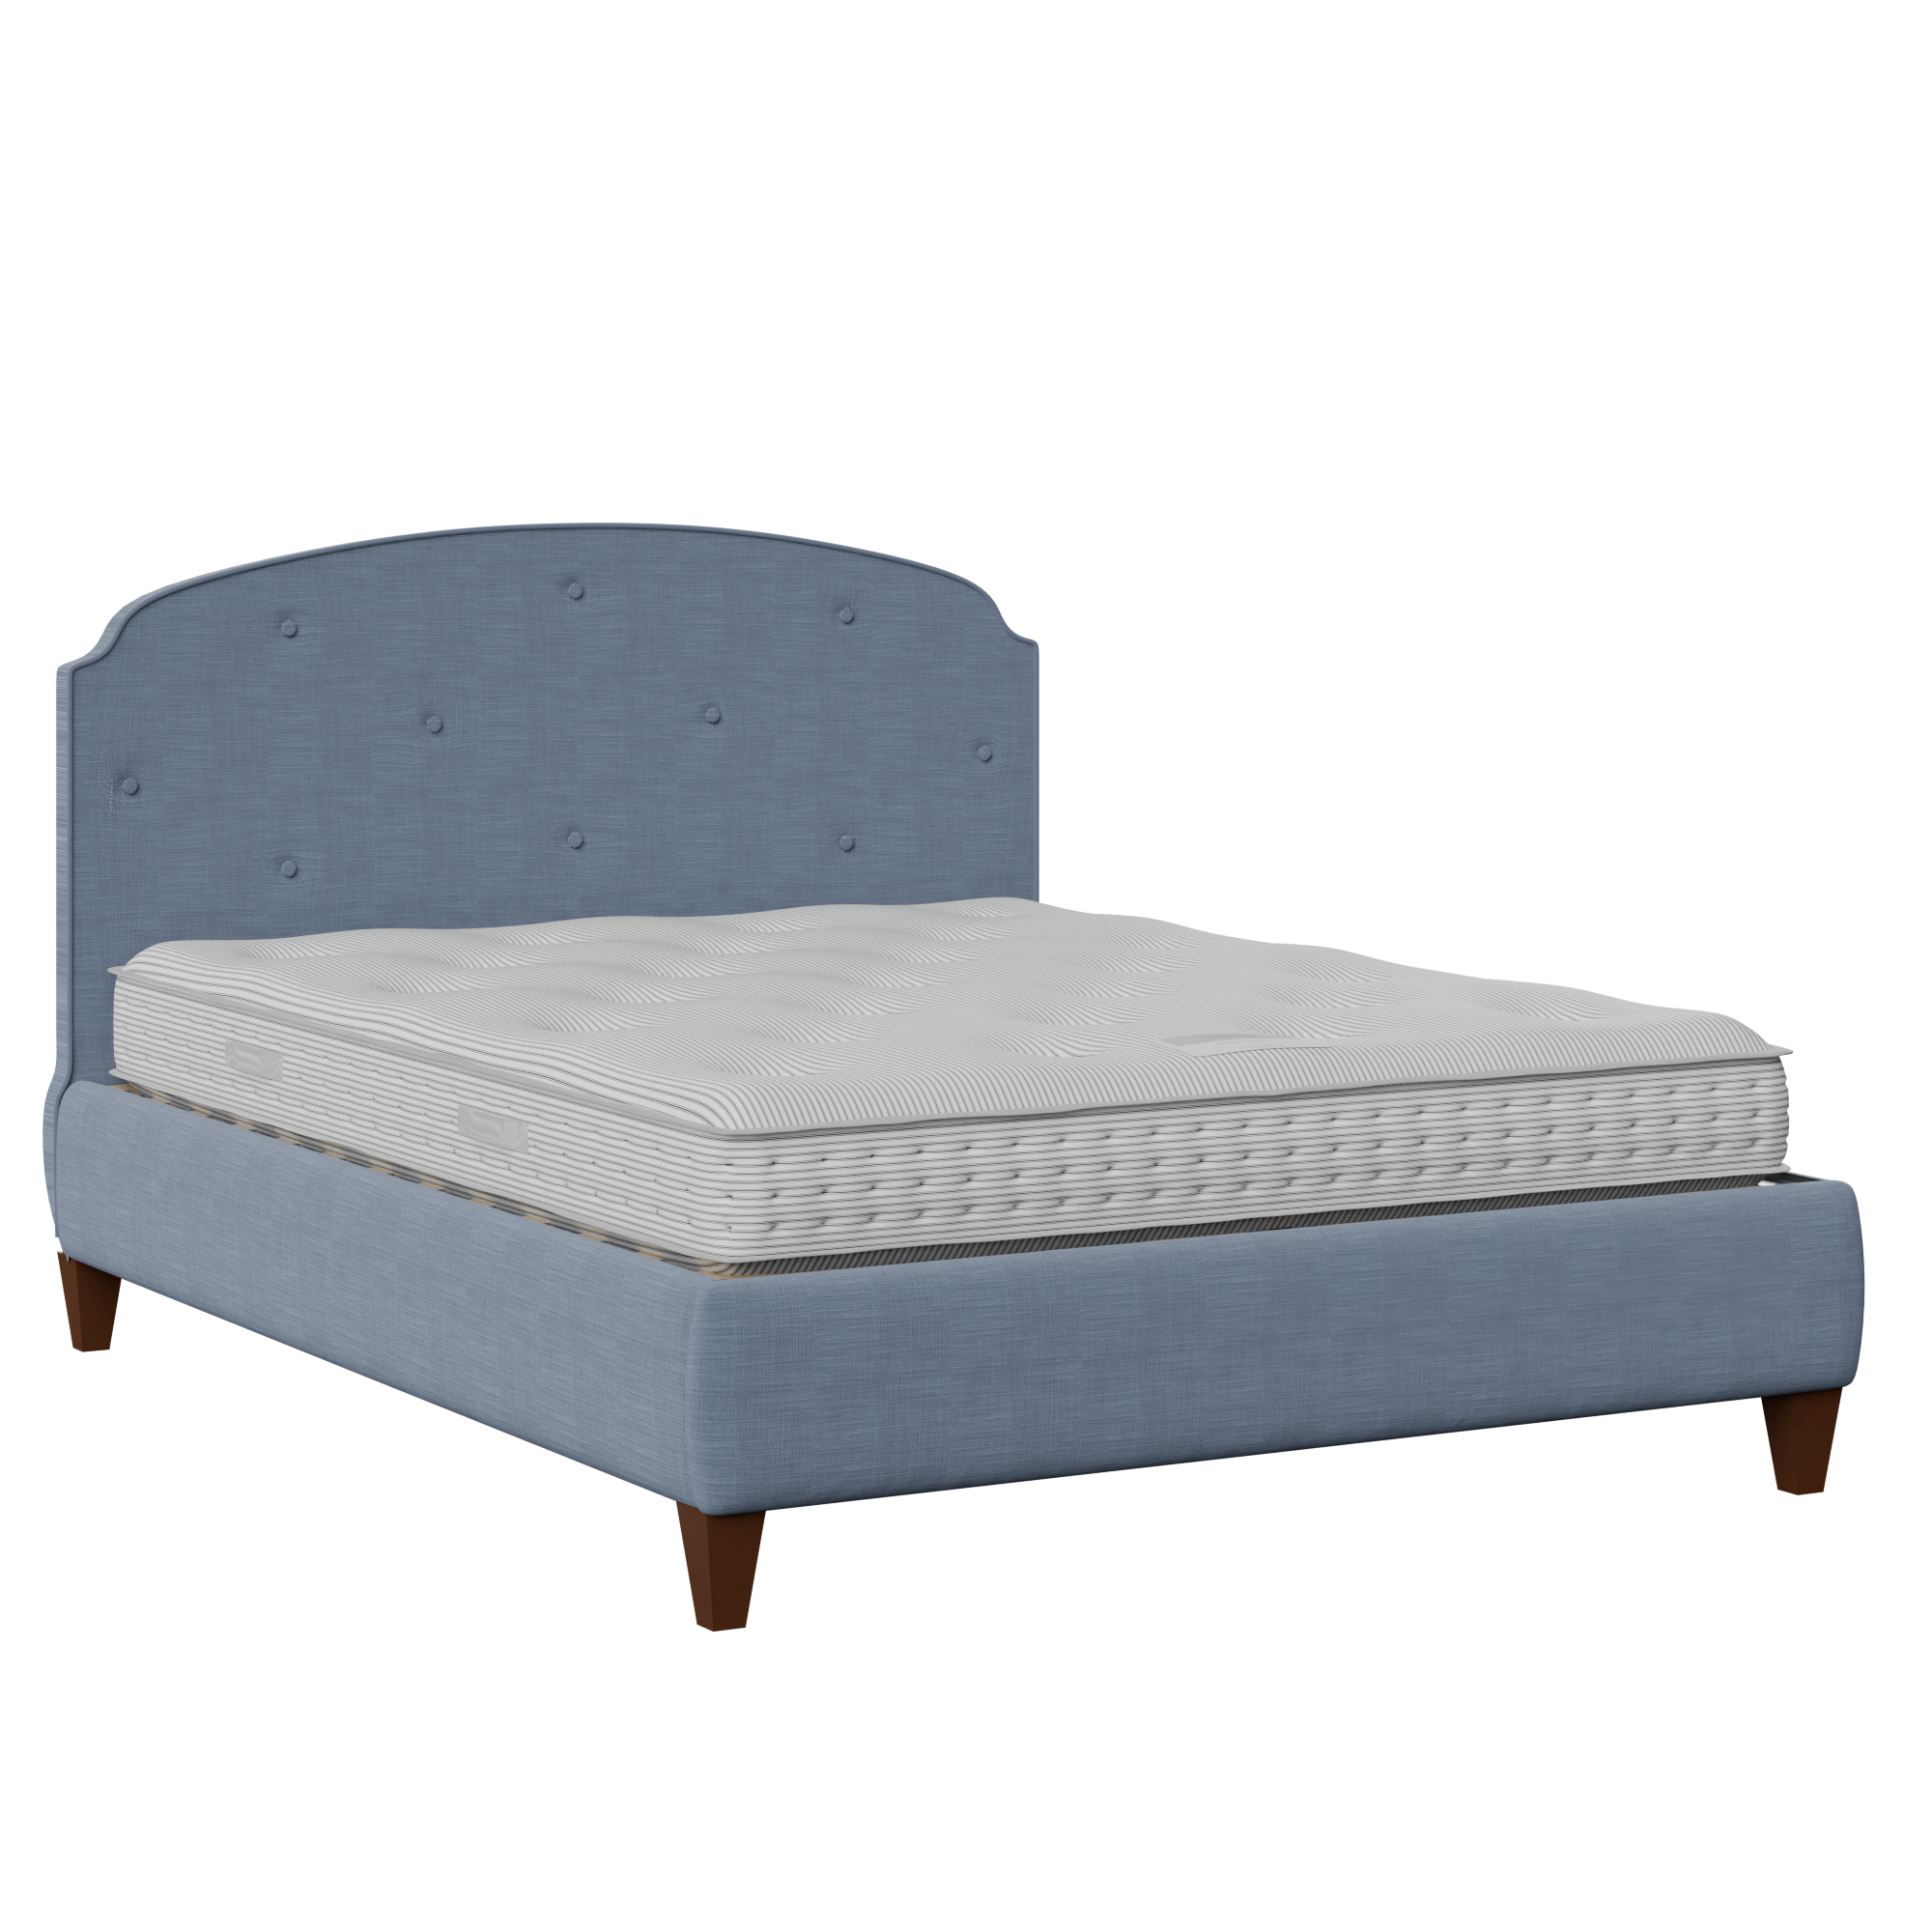 Lide Buttoned Diagonal upholstered bed in blue fabric